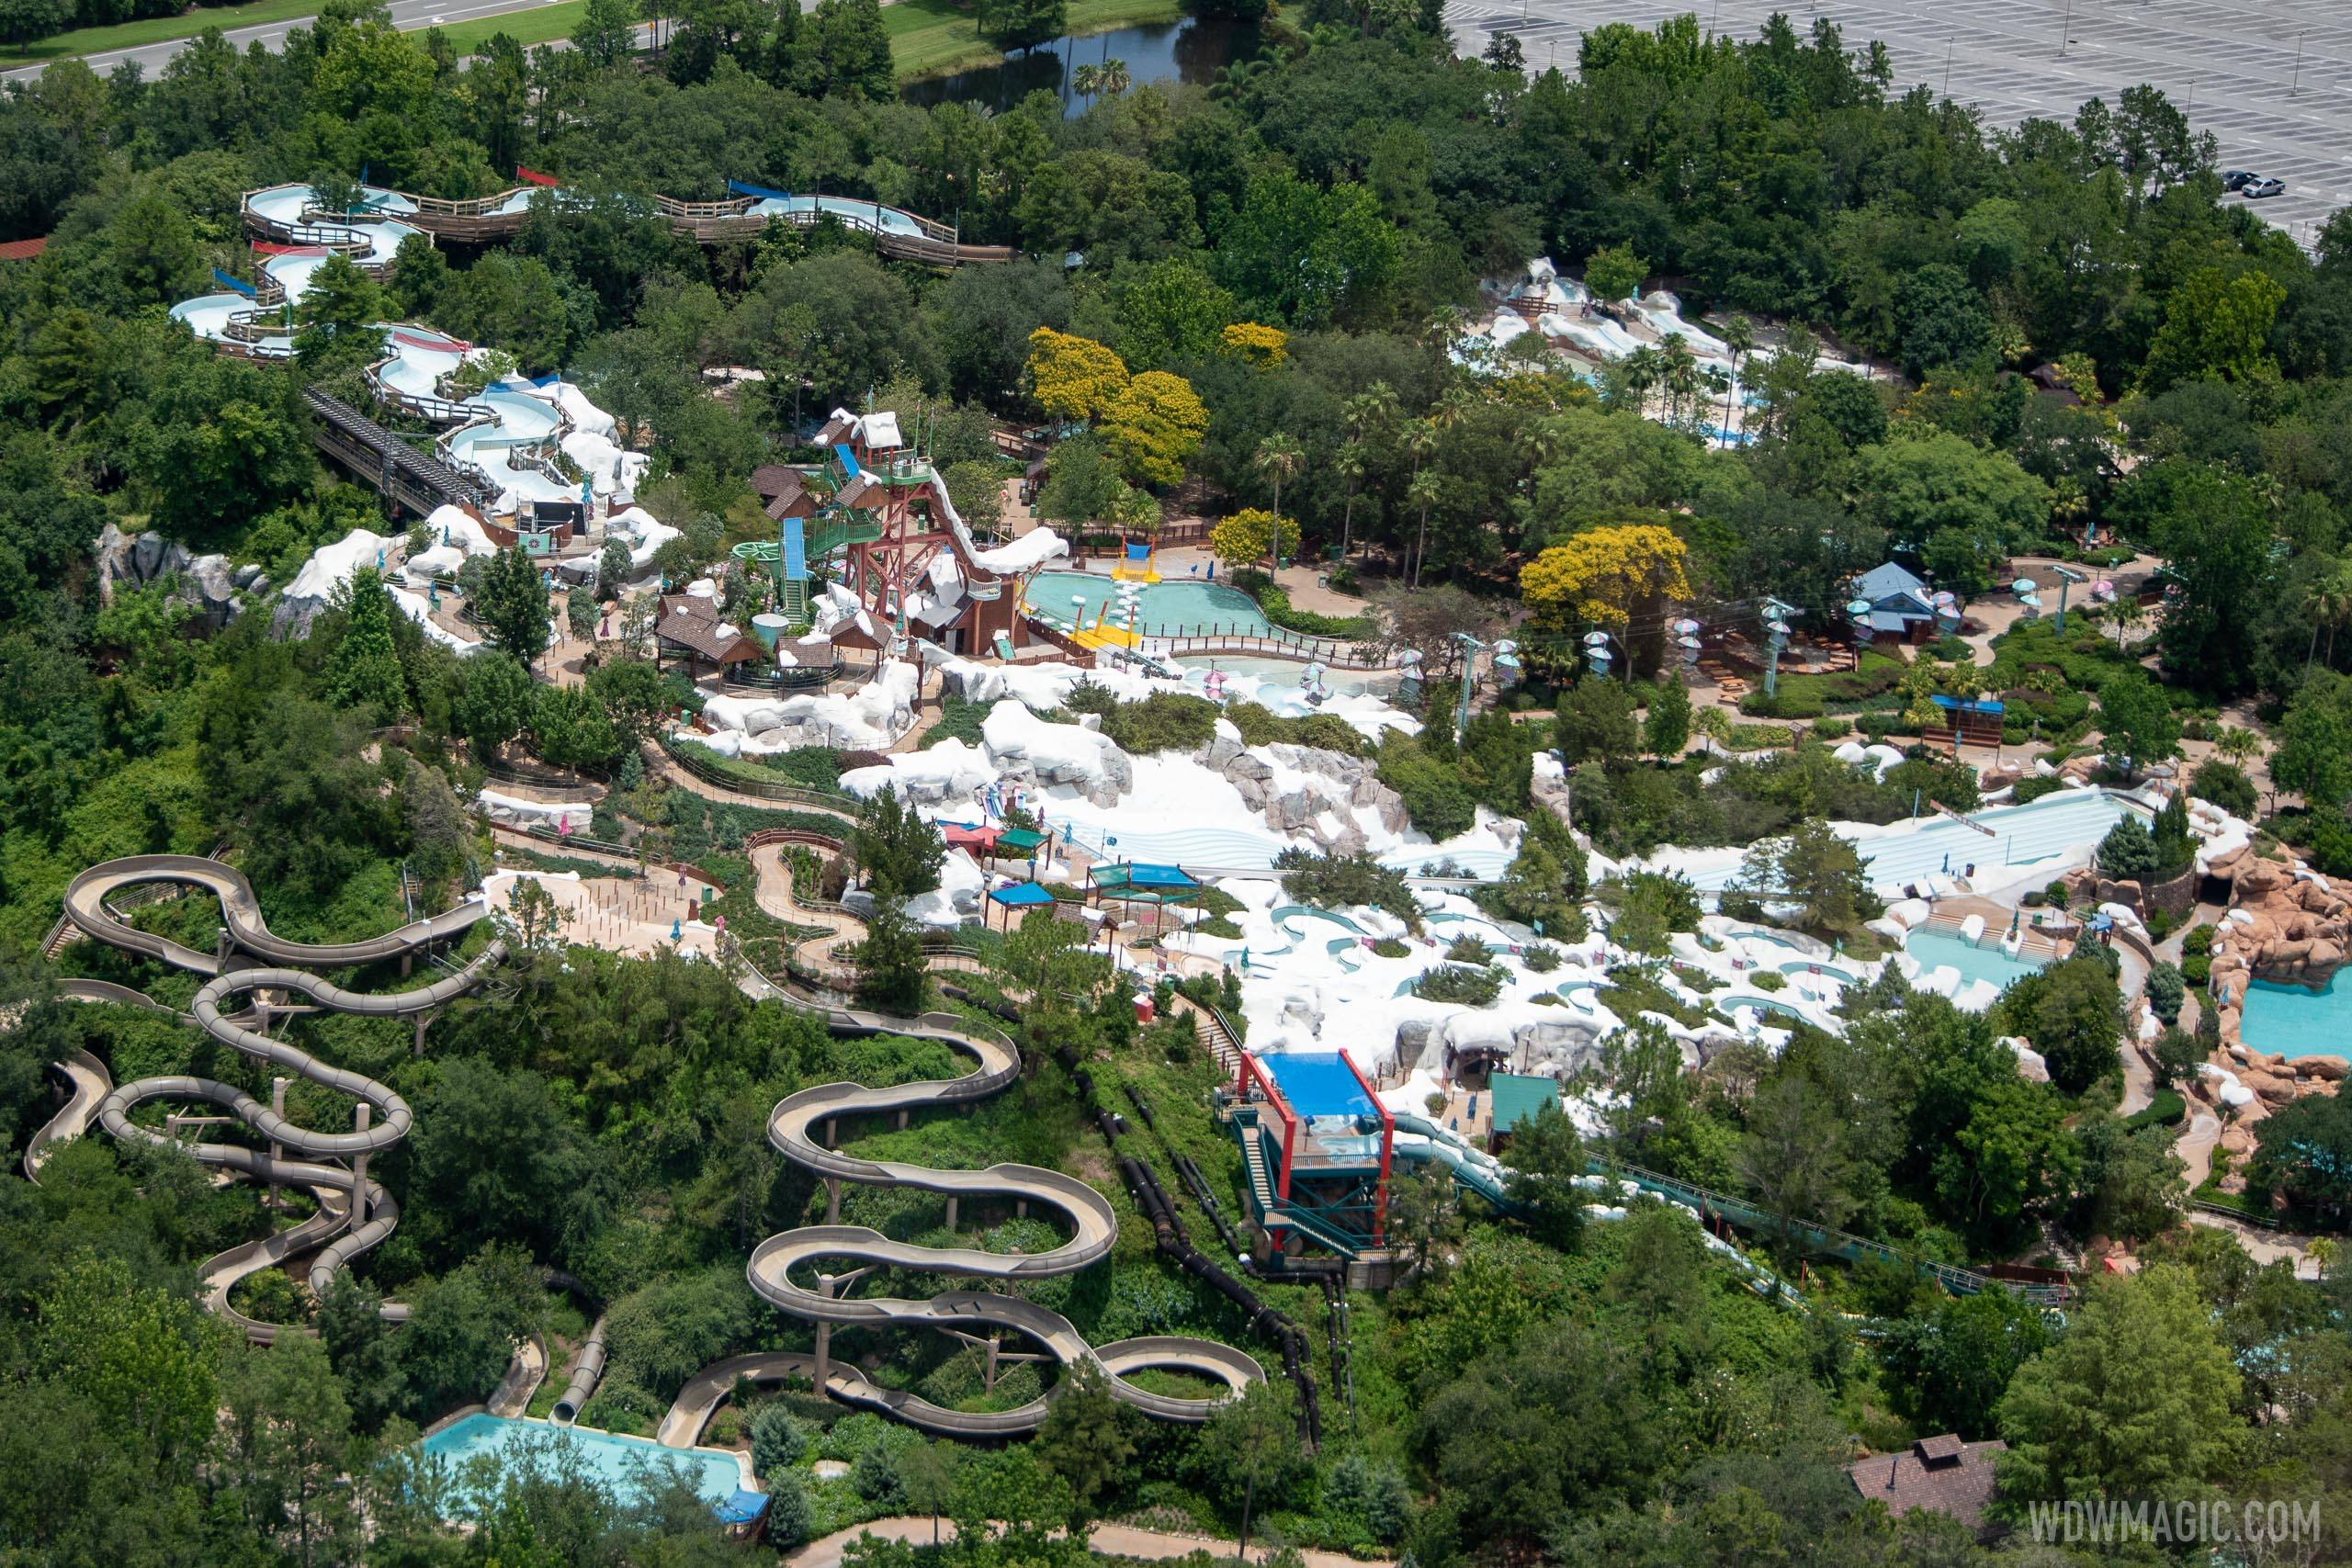 Blizzard Beach will be closed for 4 days this week